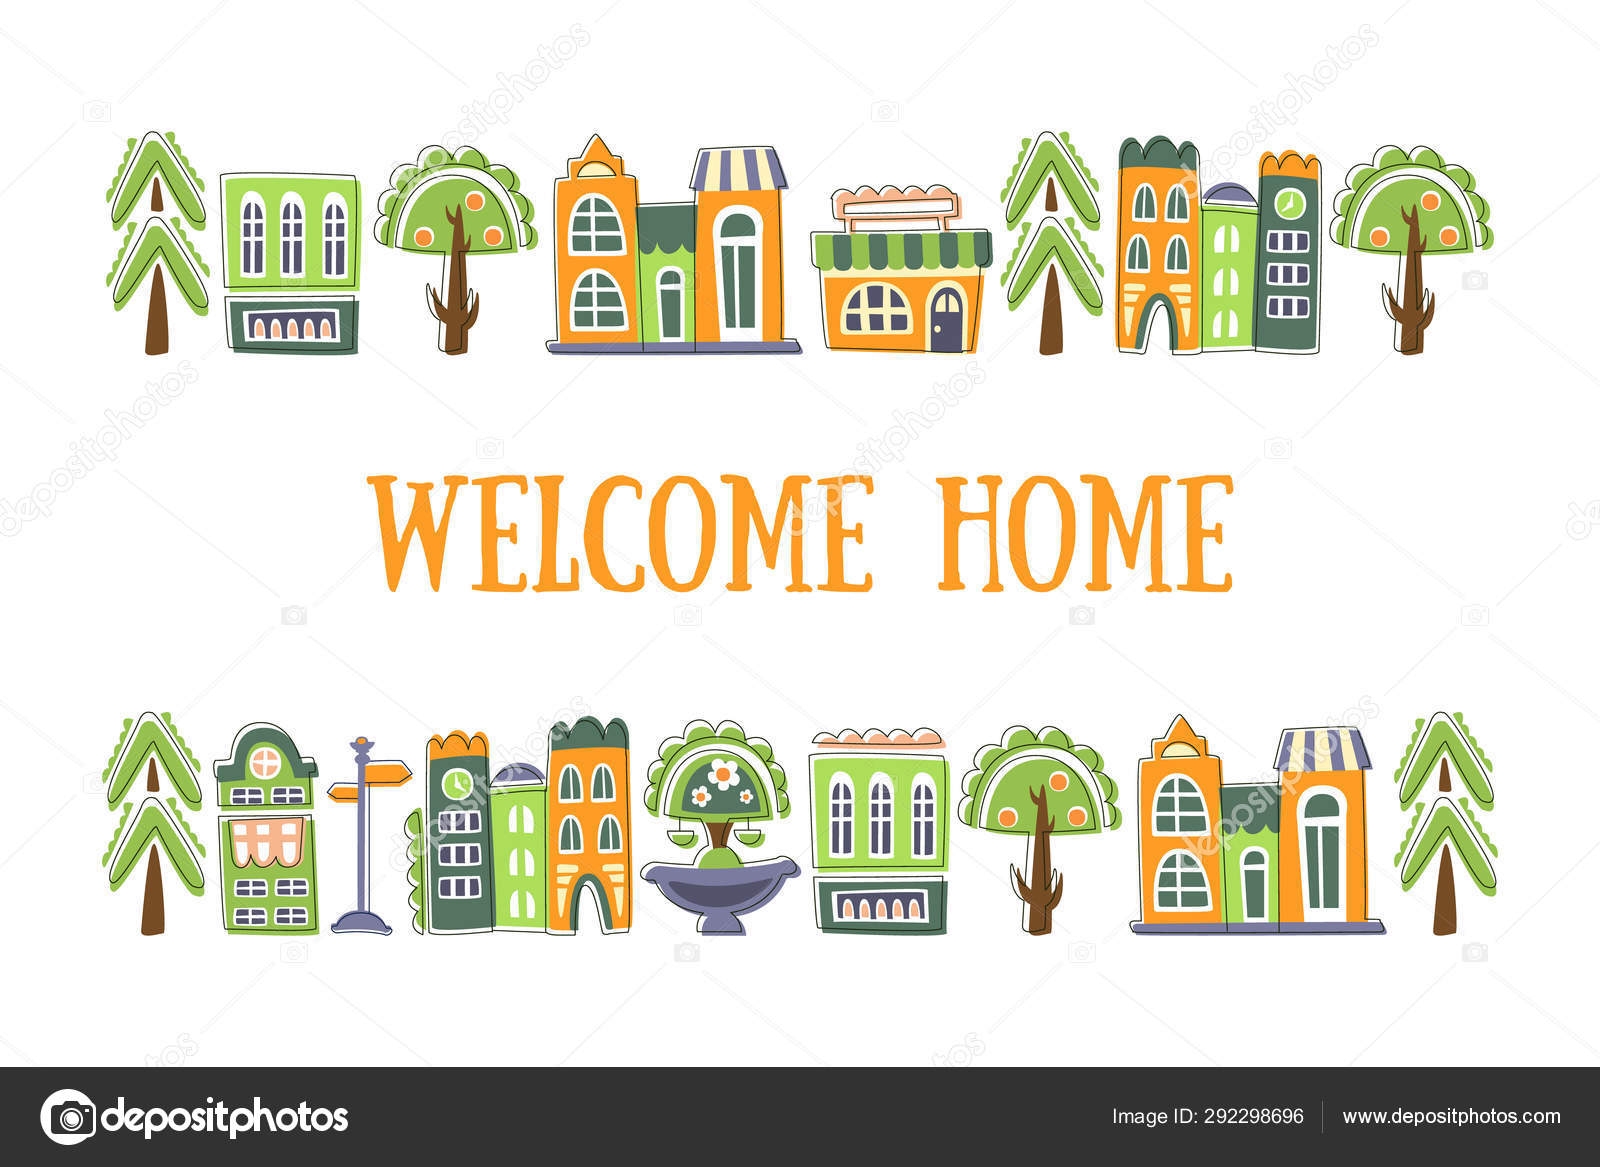 Welcome Banner Template from st4.depositphotos.com